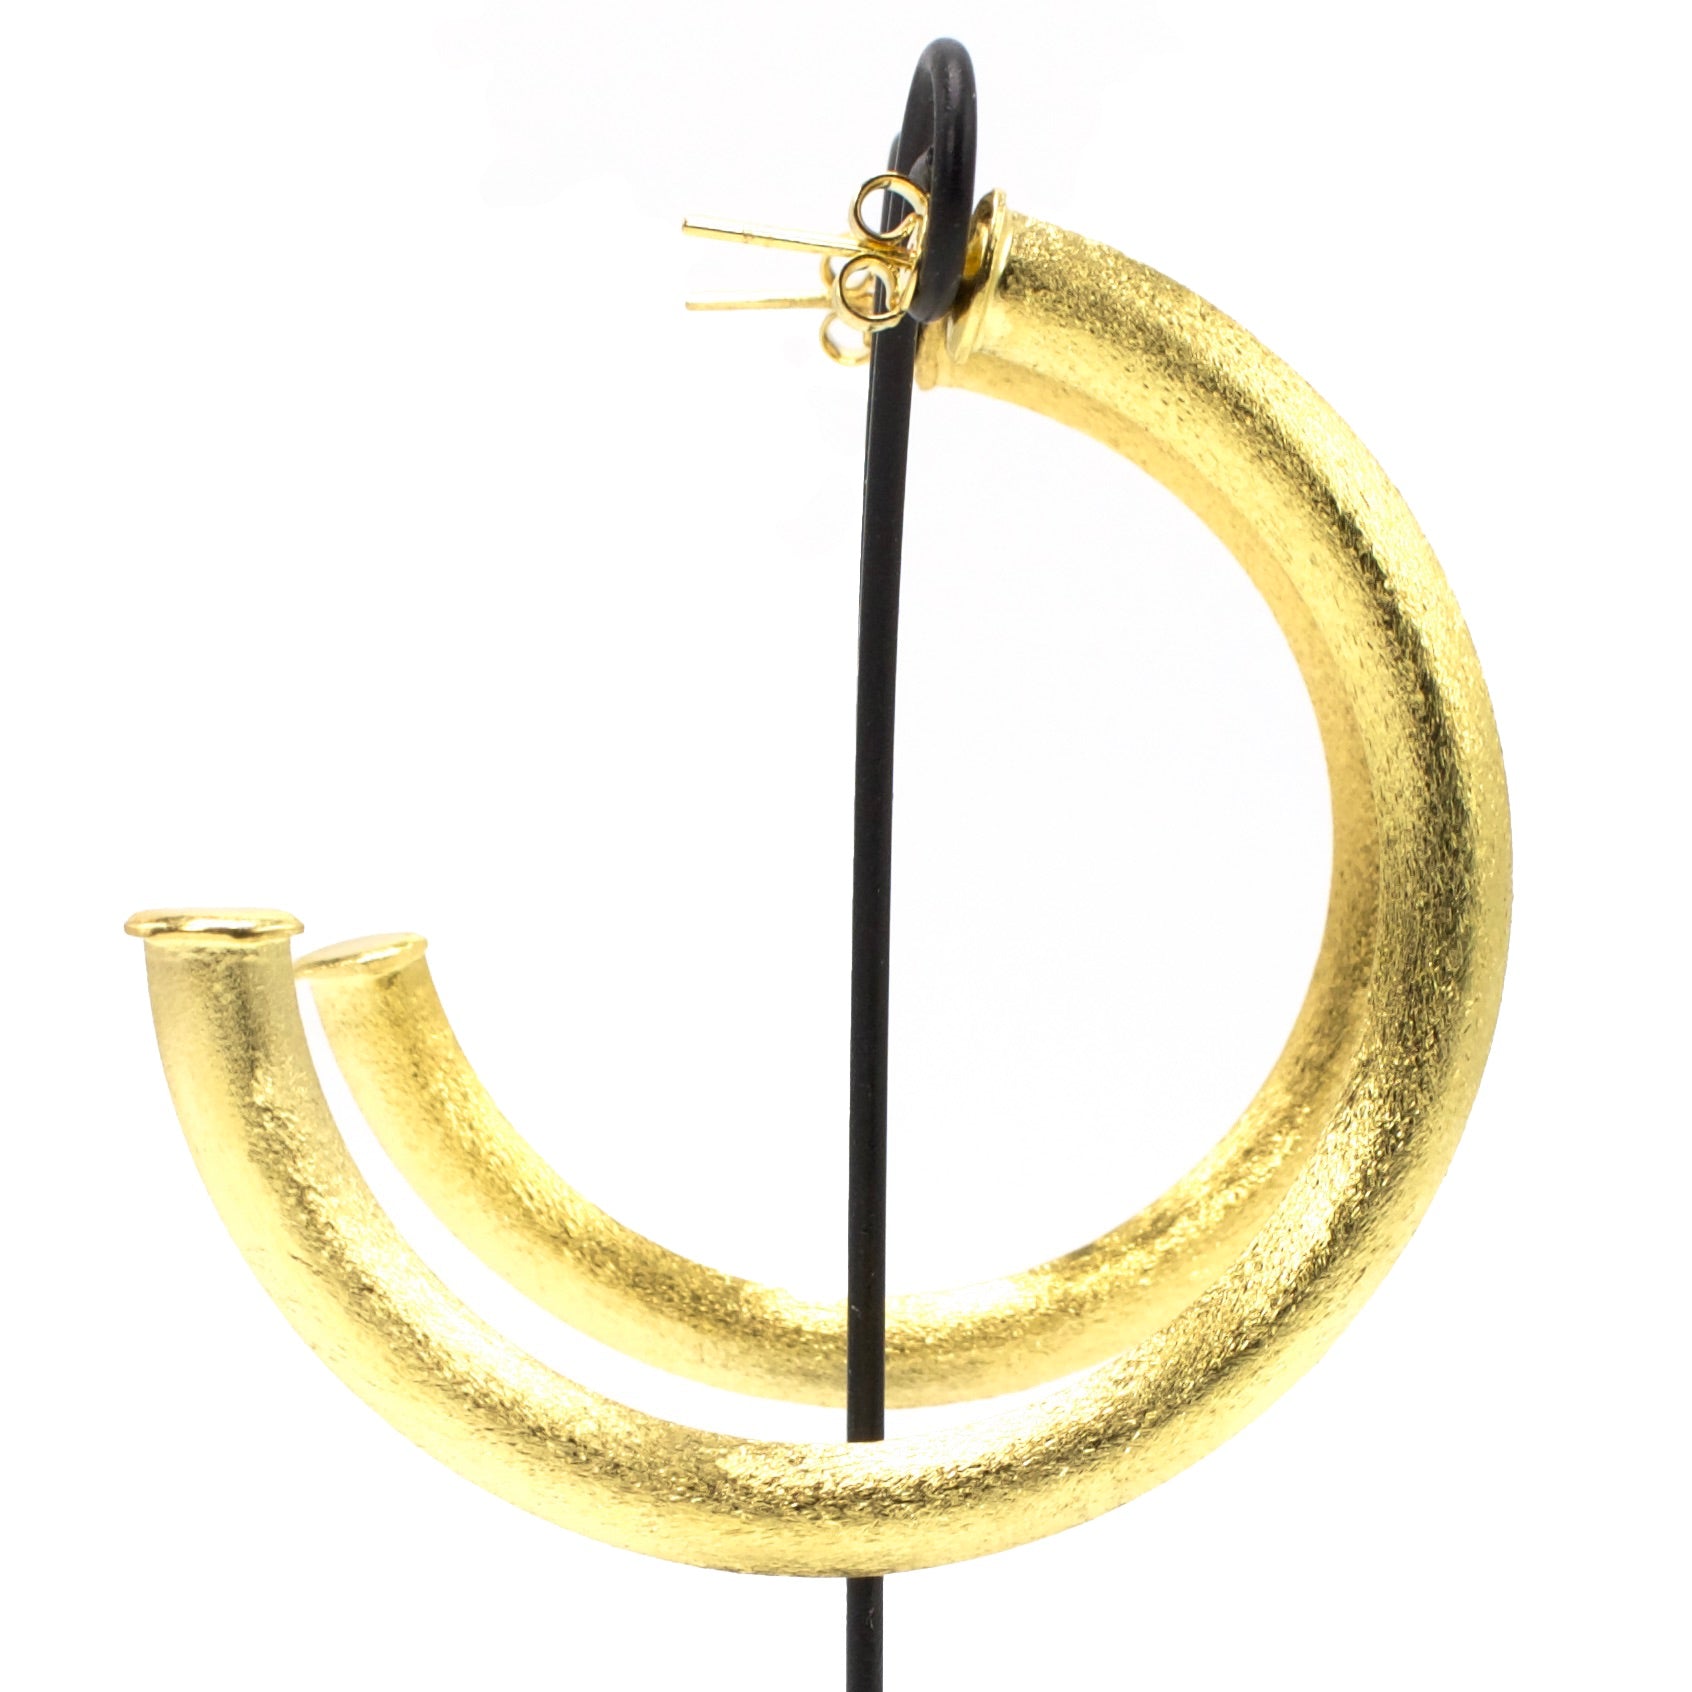 Large 18K Gold Plated Open Hoop Earrings with Brushed Finish